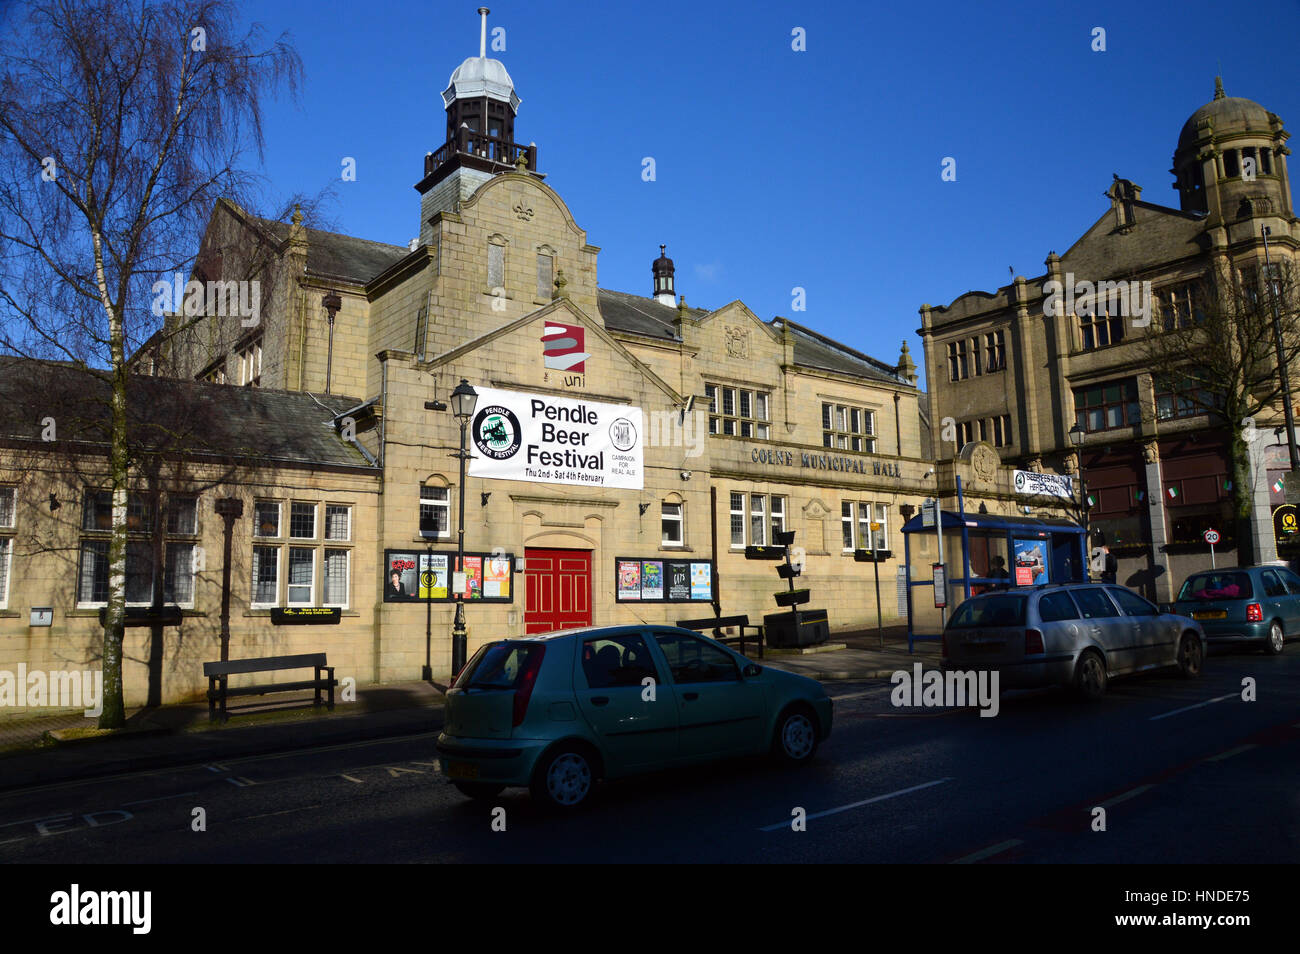 Pendle Beer Festival at the Colne Municipal Hall, Colne, Pendle, Lancashire, England, UK. Stock Photo